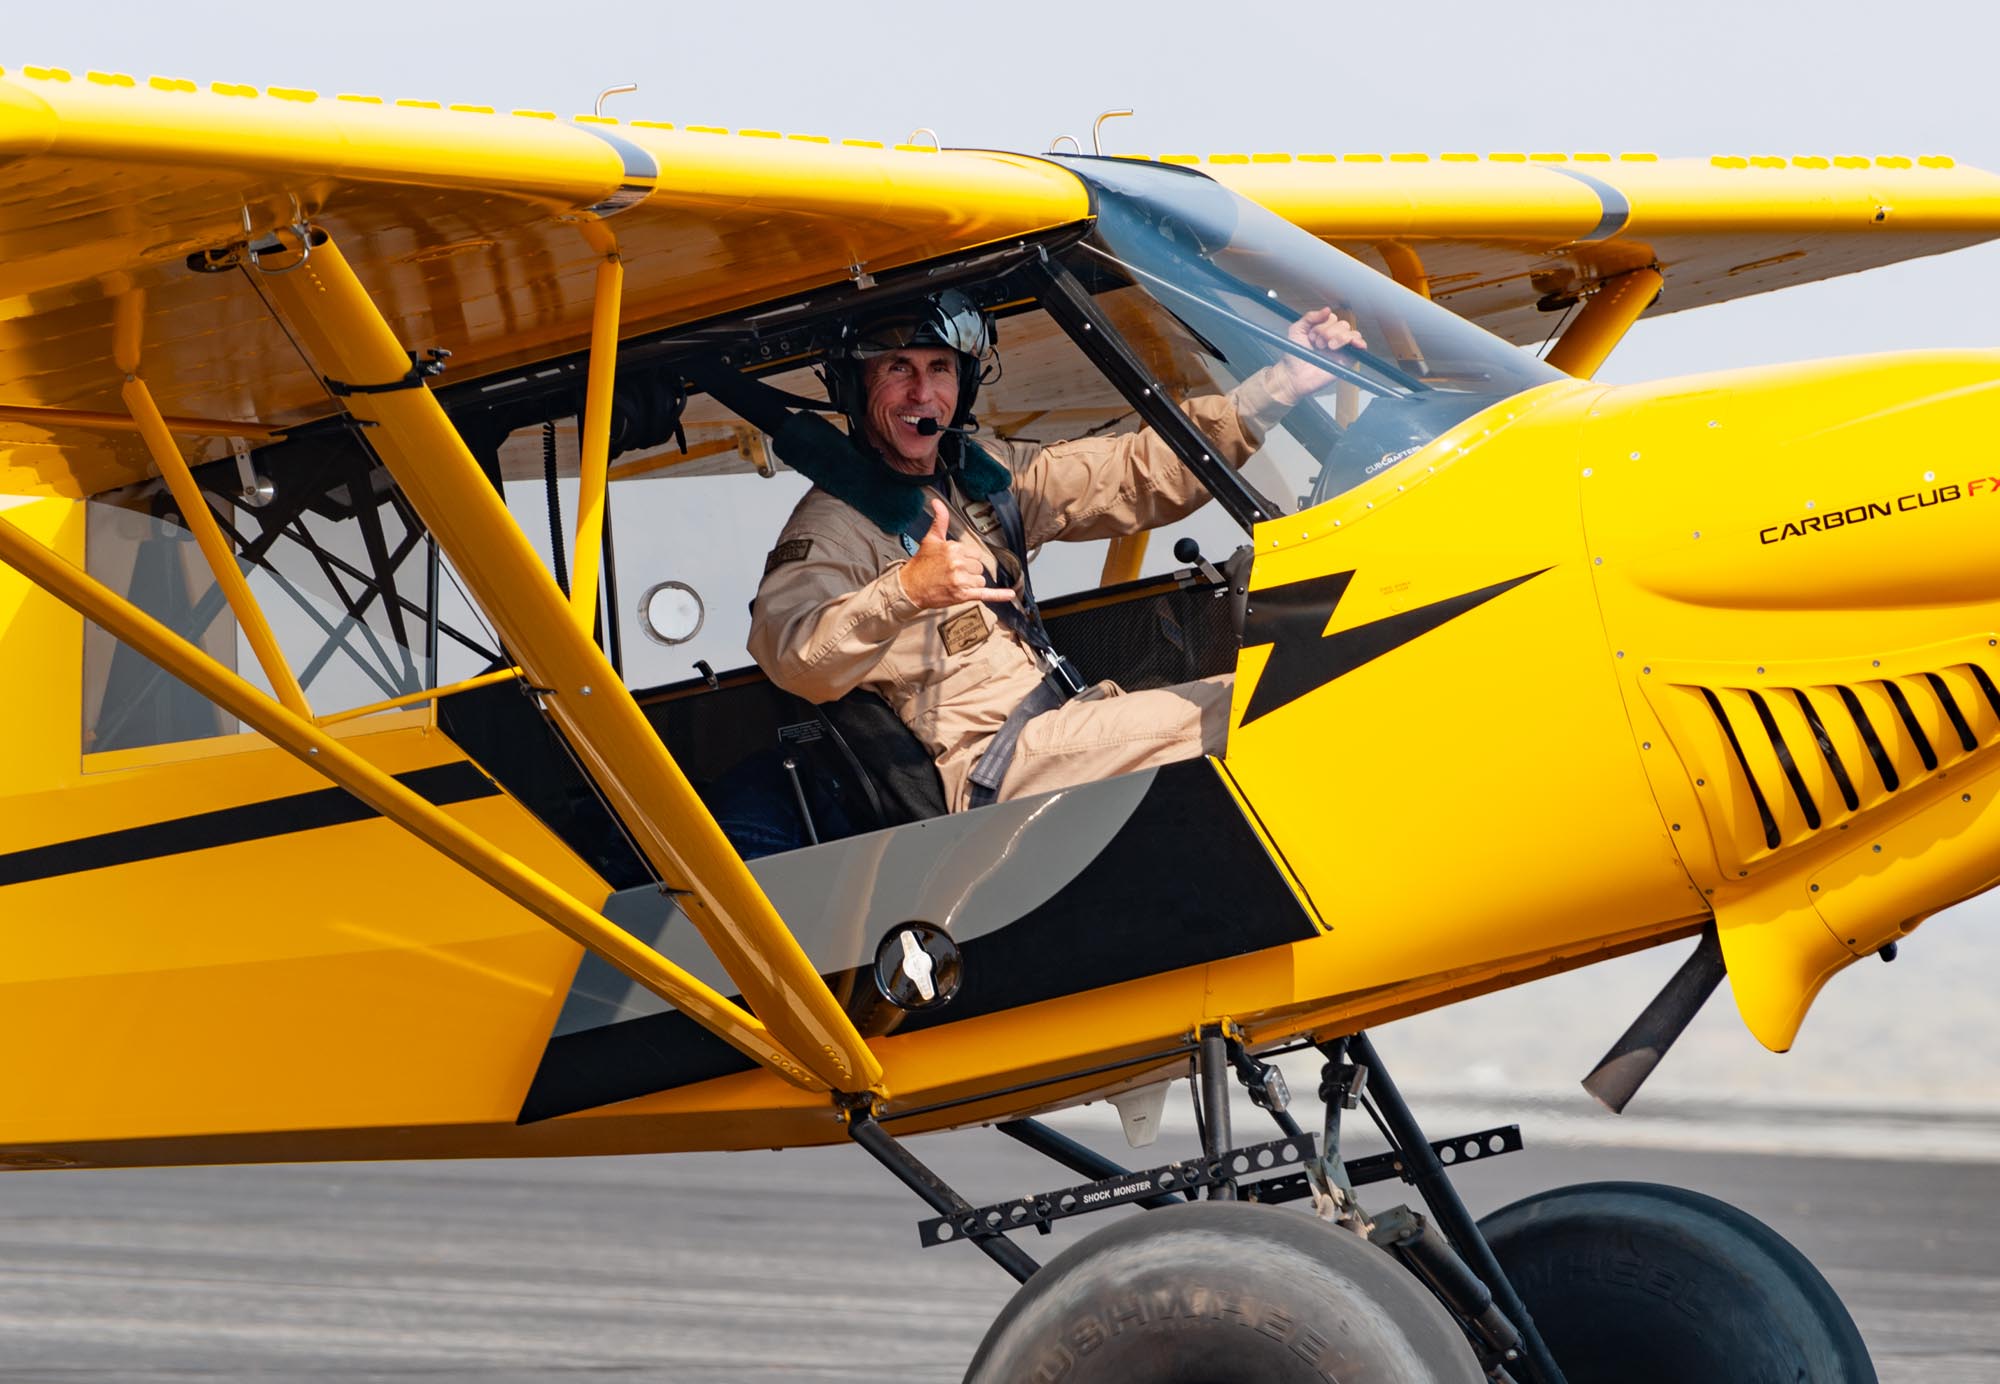 A smiling man taxis by in an airplane and gives a shaka sign